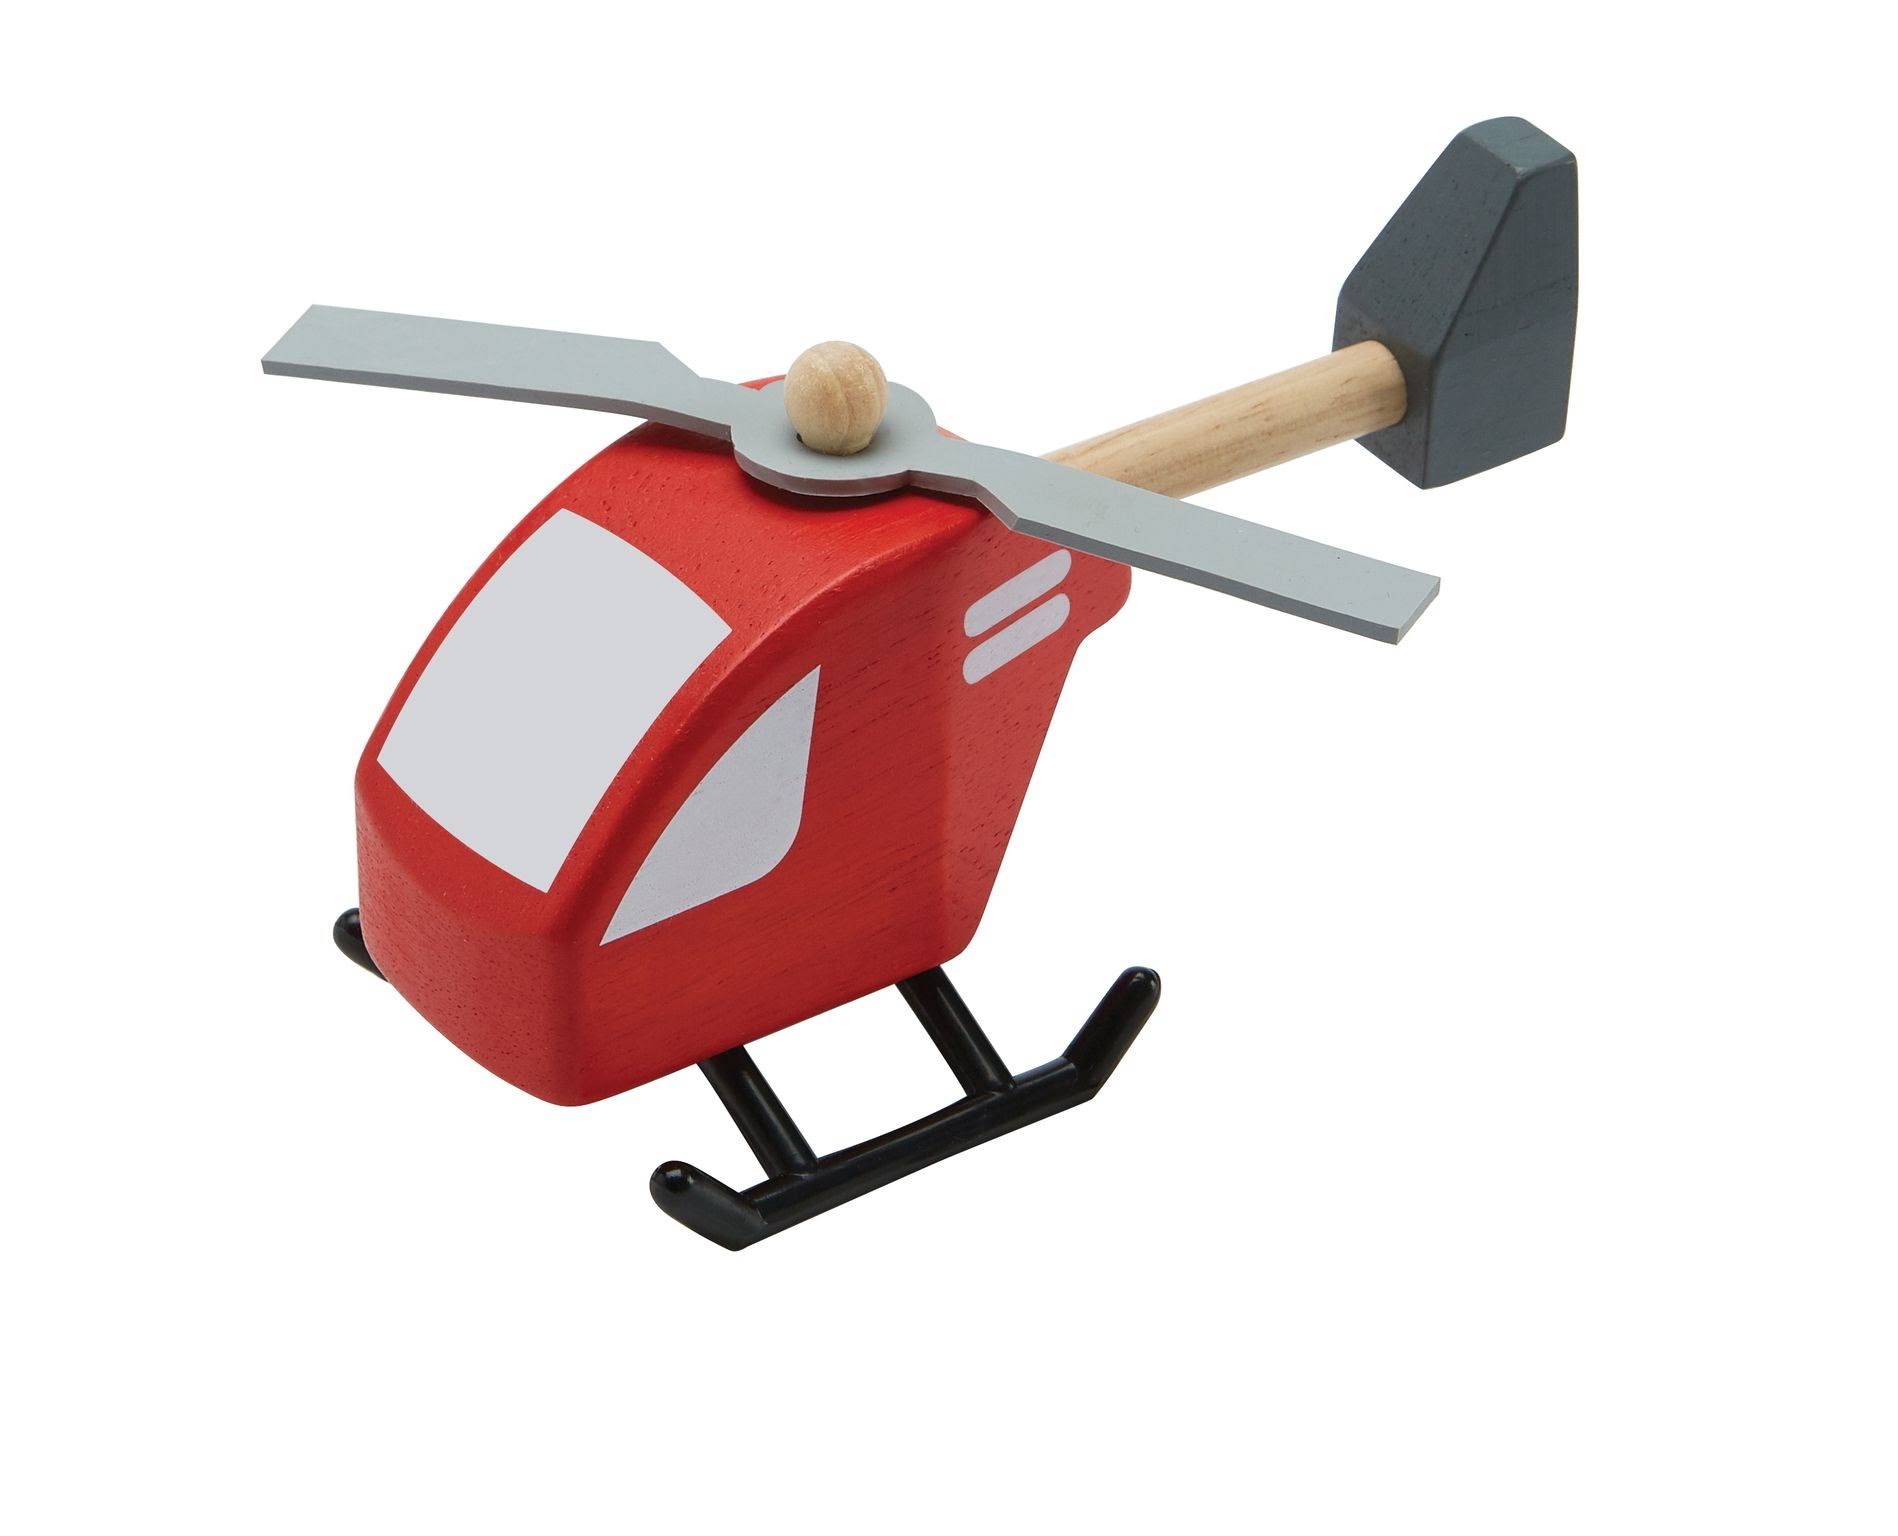 Helicopter by Plan Toys